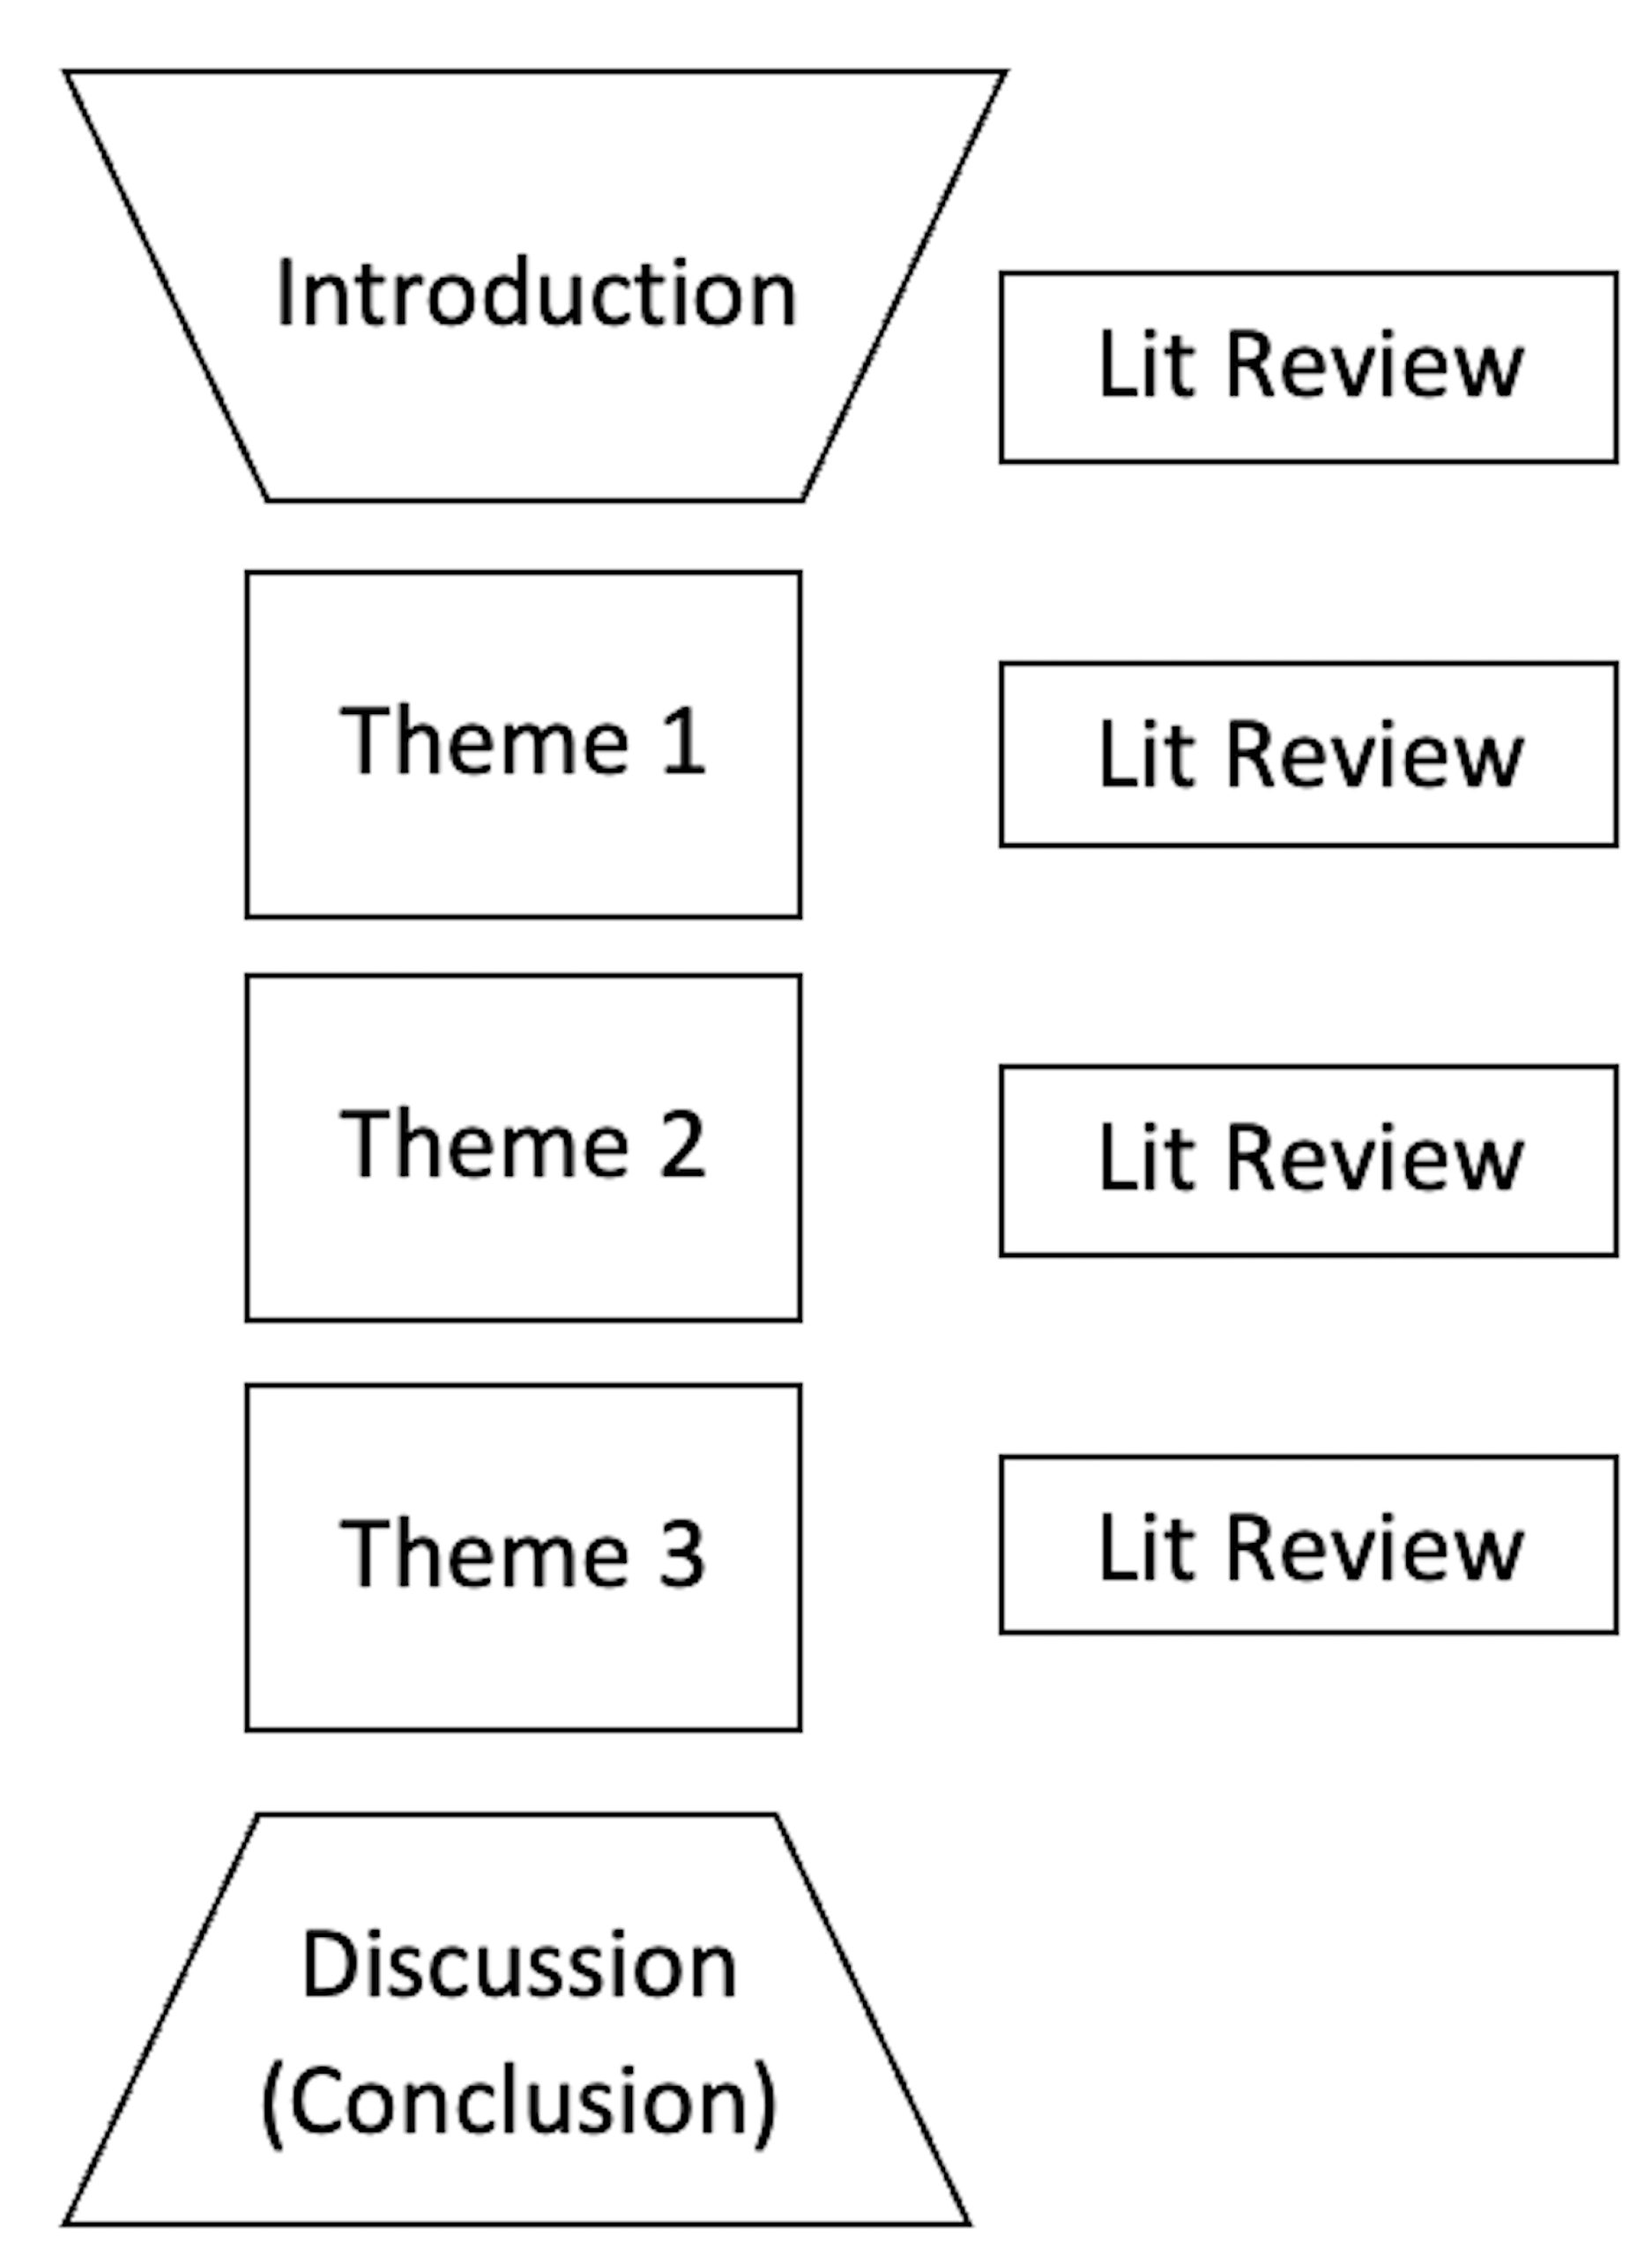 Graphic shows a thesis organised by theme, with a literature review included in the overall introduction as well as within each themed chapter.